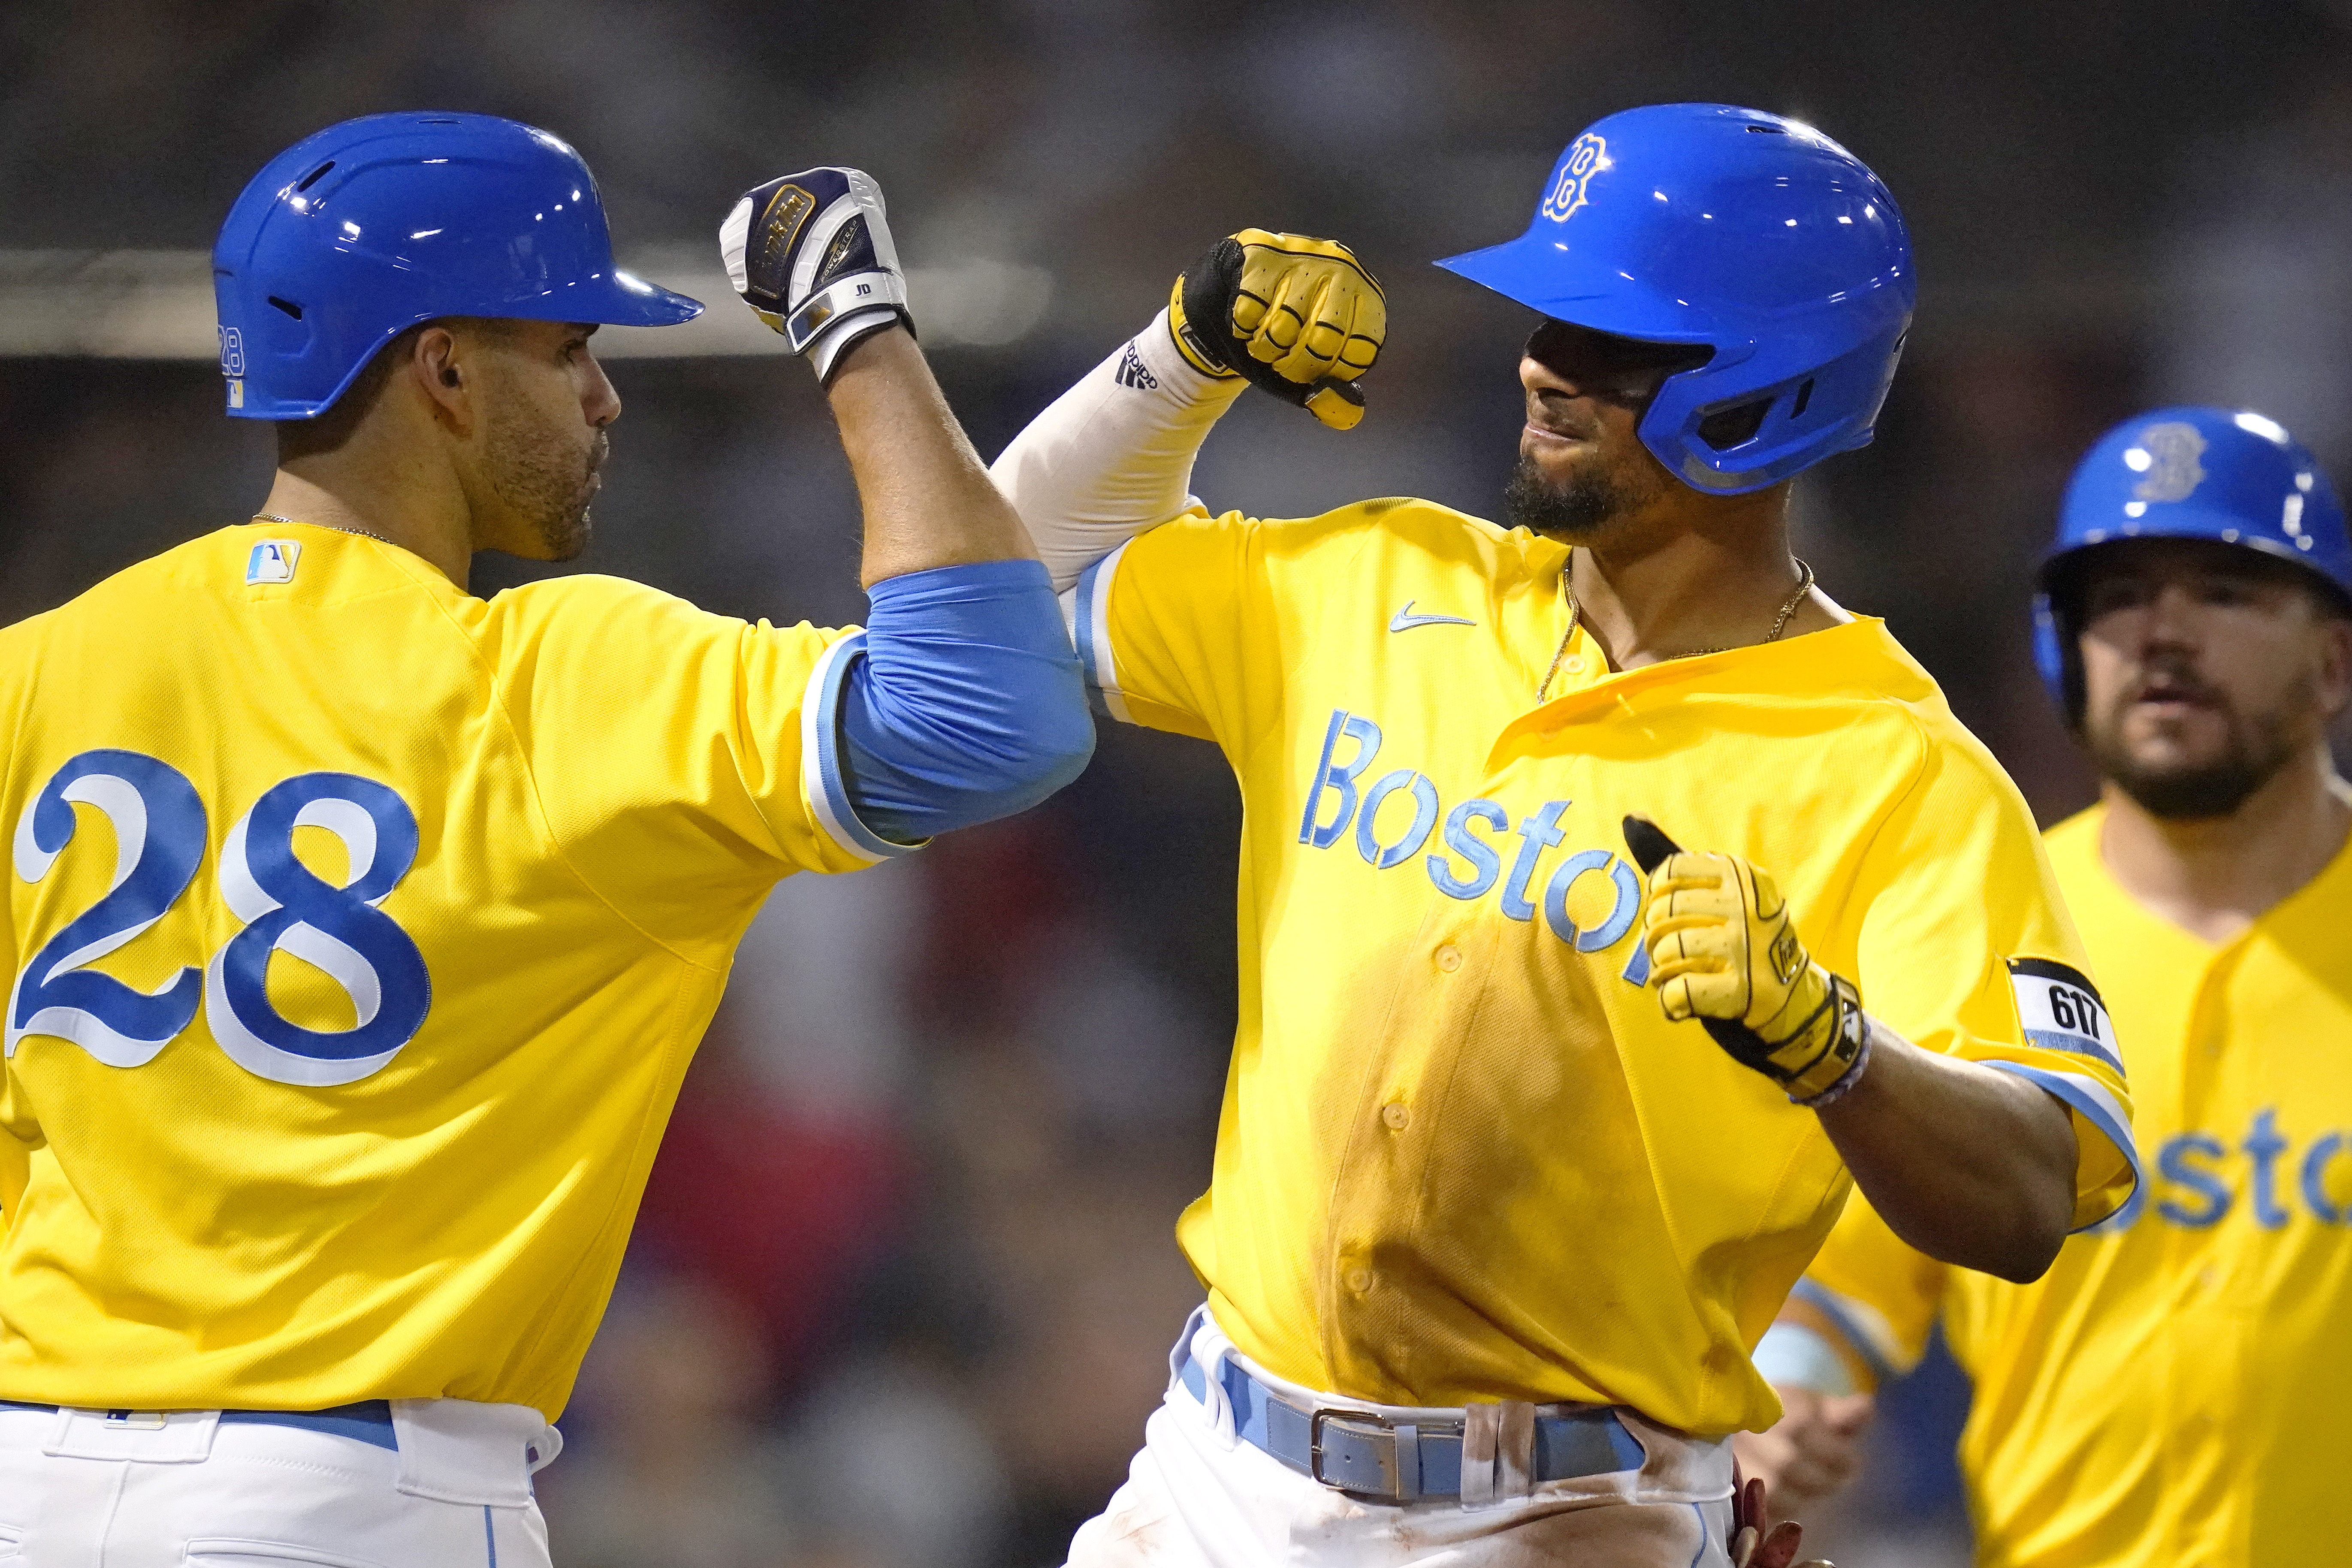 Will Boston Red Sox keep wearing yellow and blue uniforms during